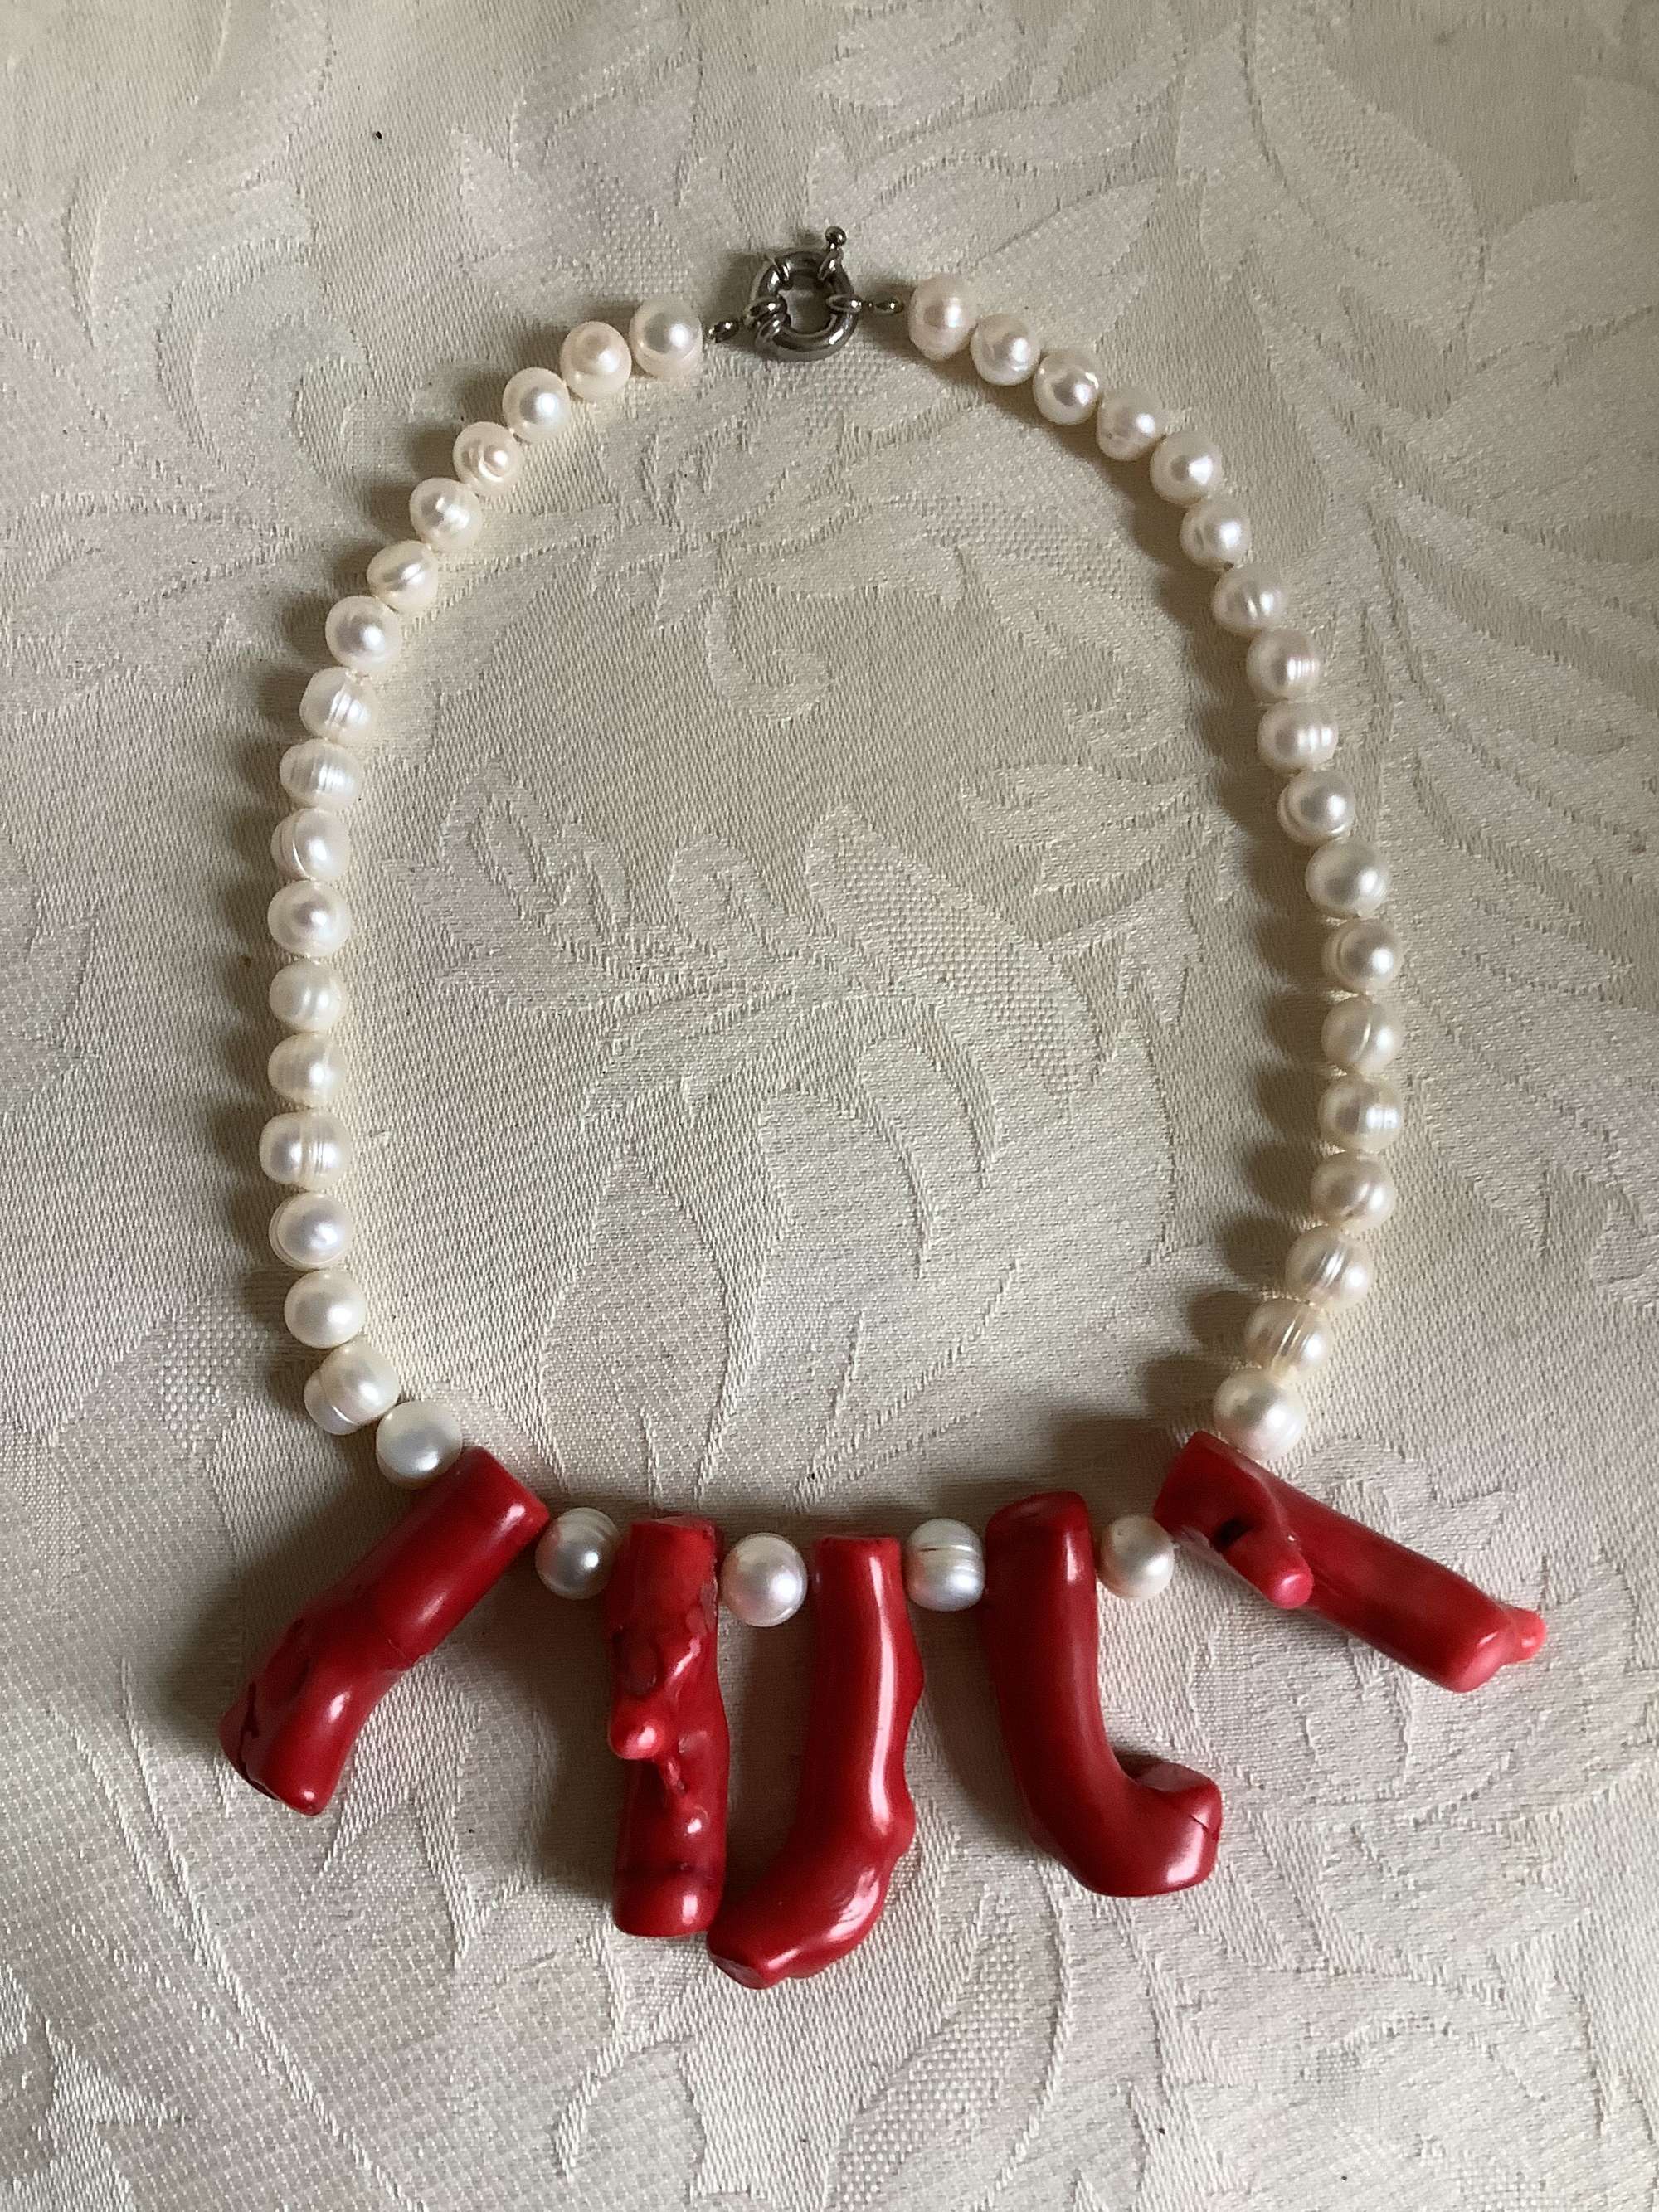 A very unusual and attractive pearl and coral necklace